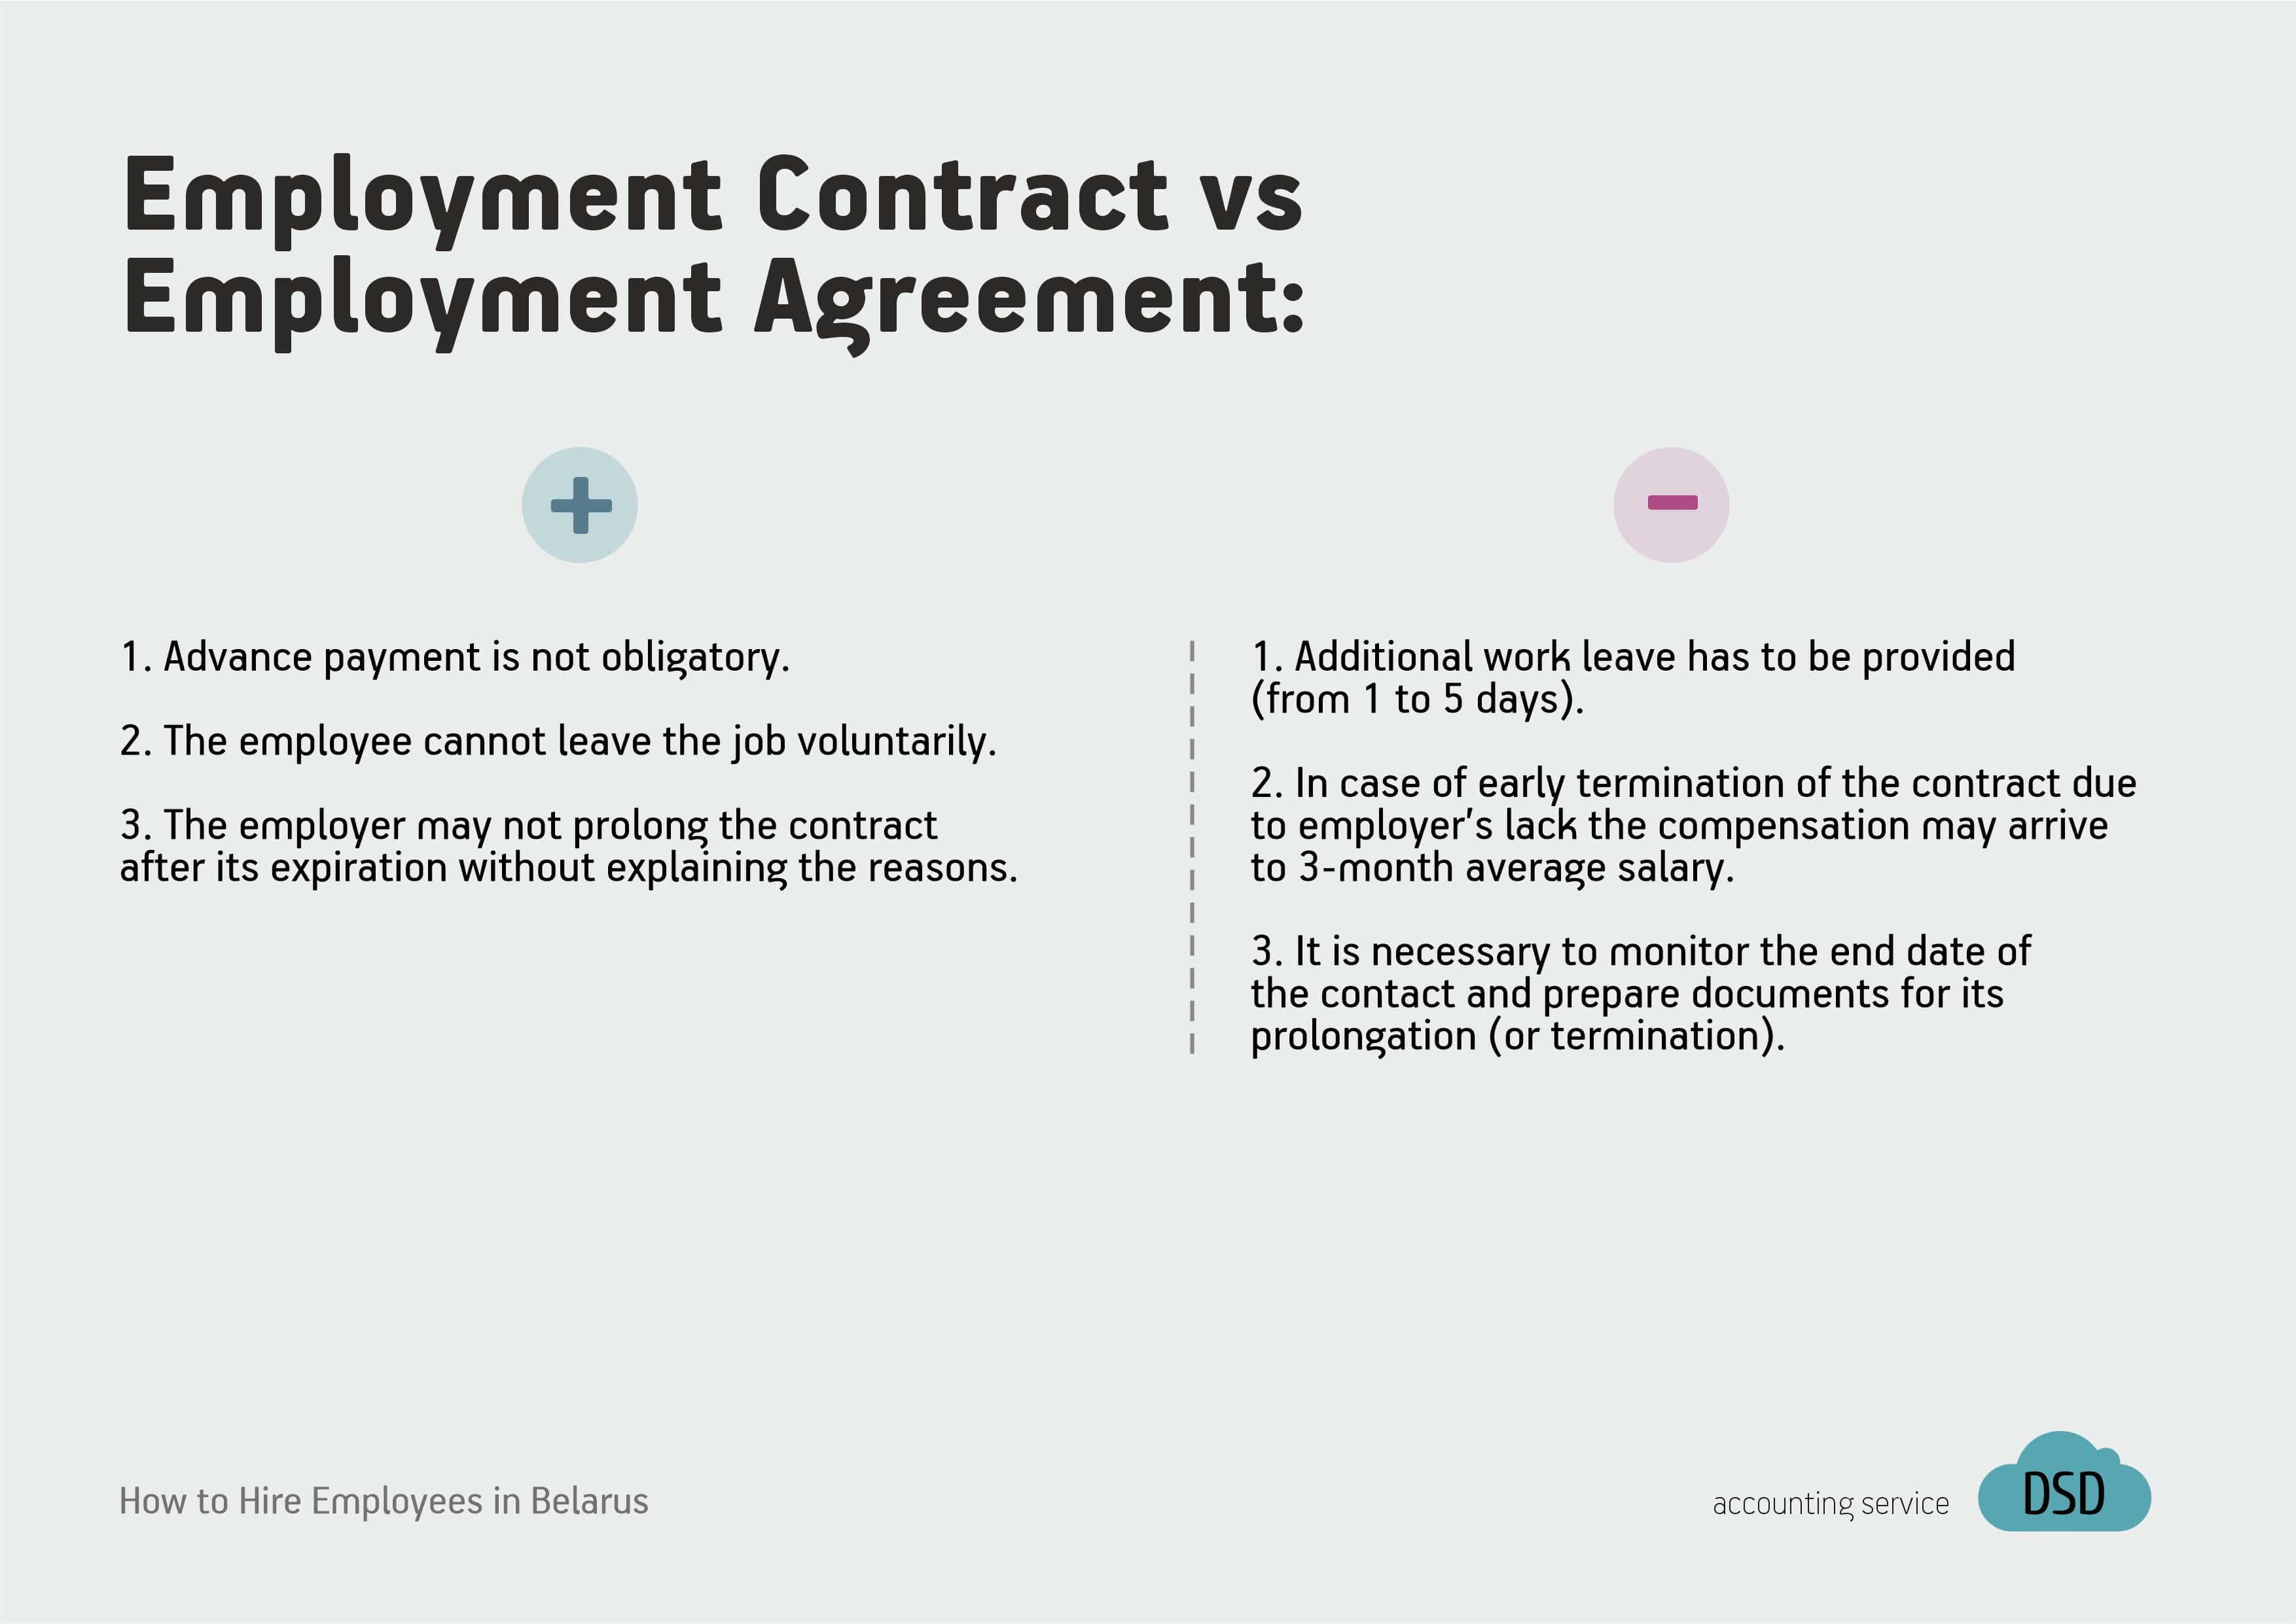 Employment Contract vs Employment Agreement